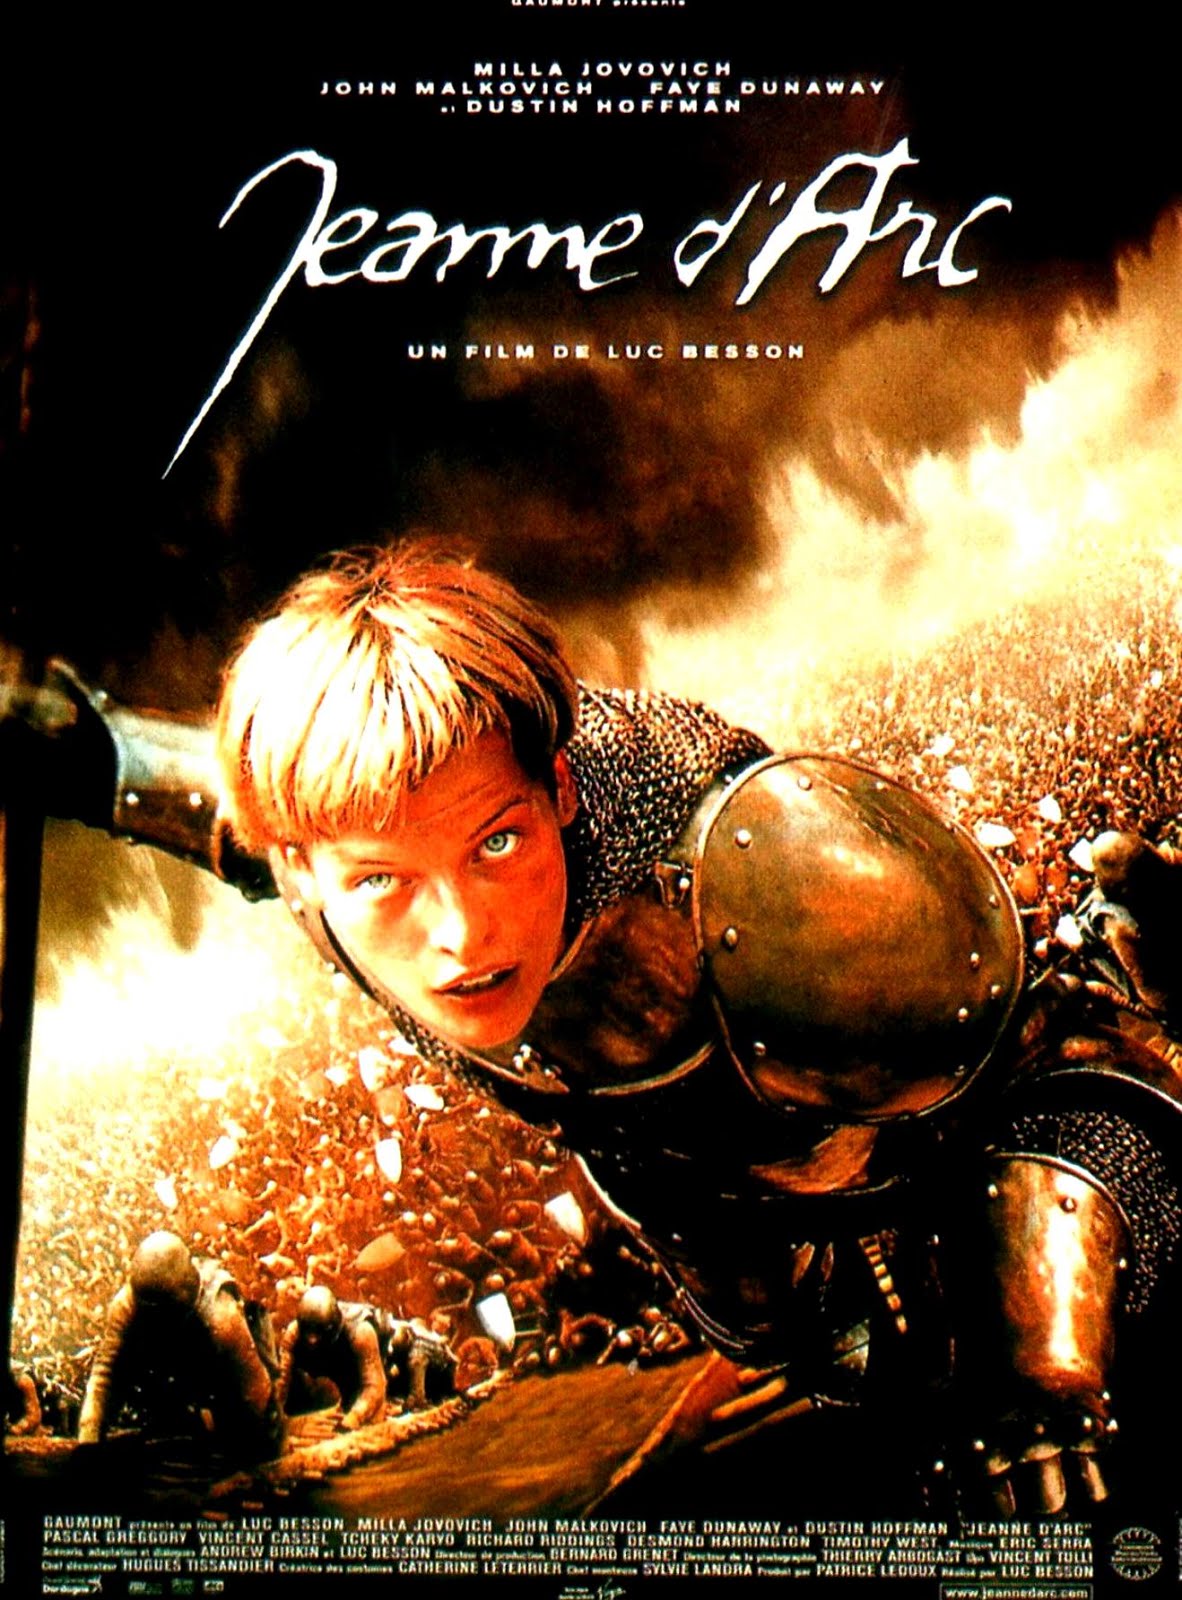 Jeanne d'Arc (1998) Luc Besson - Joan of Arc (15.06.1998 / 12.1998)